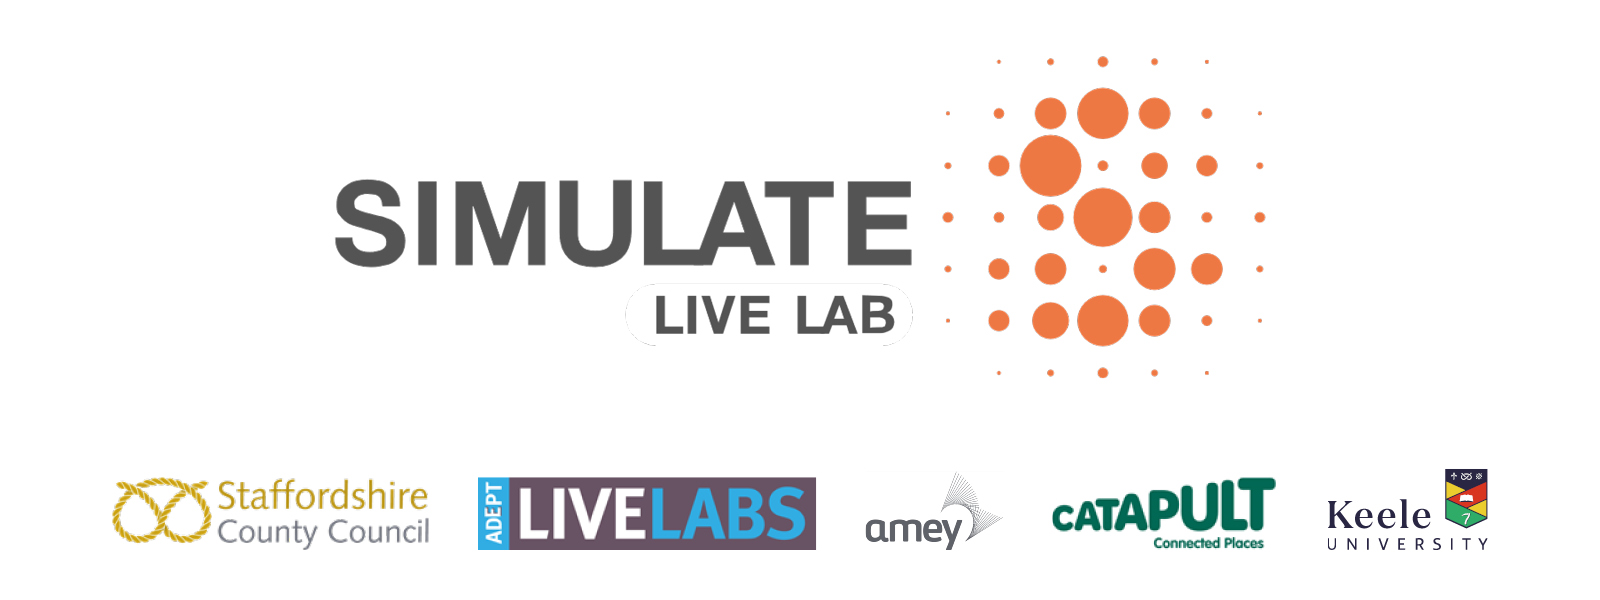 SIMULATE Live Lab project